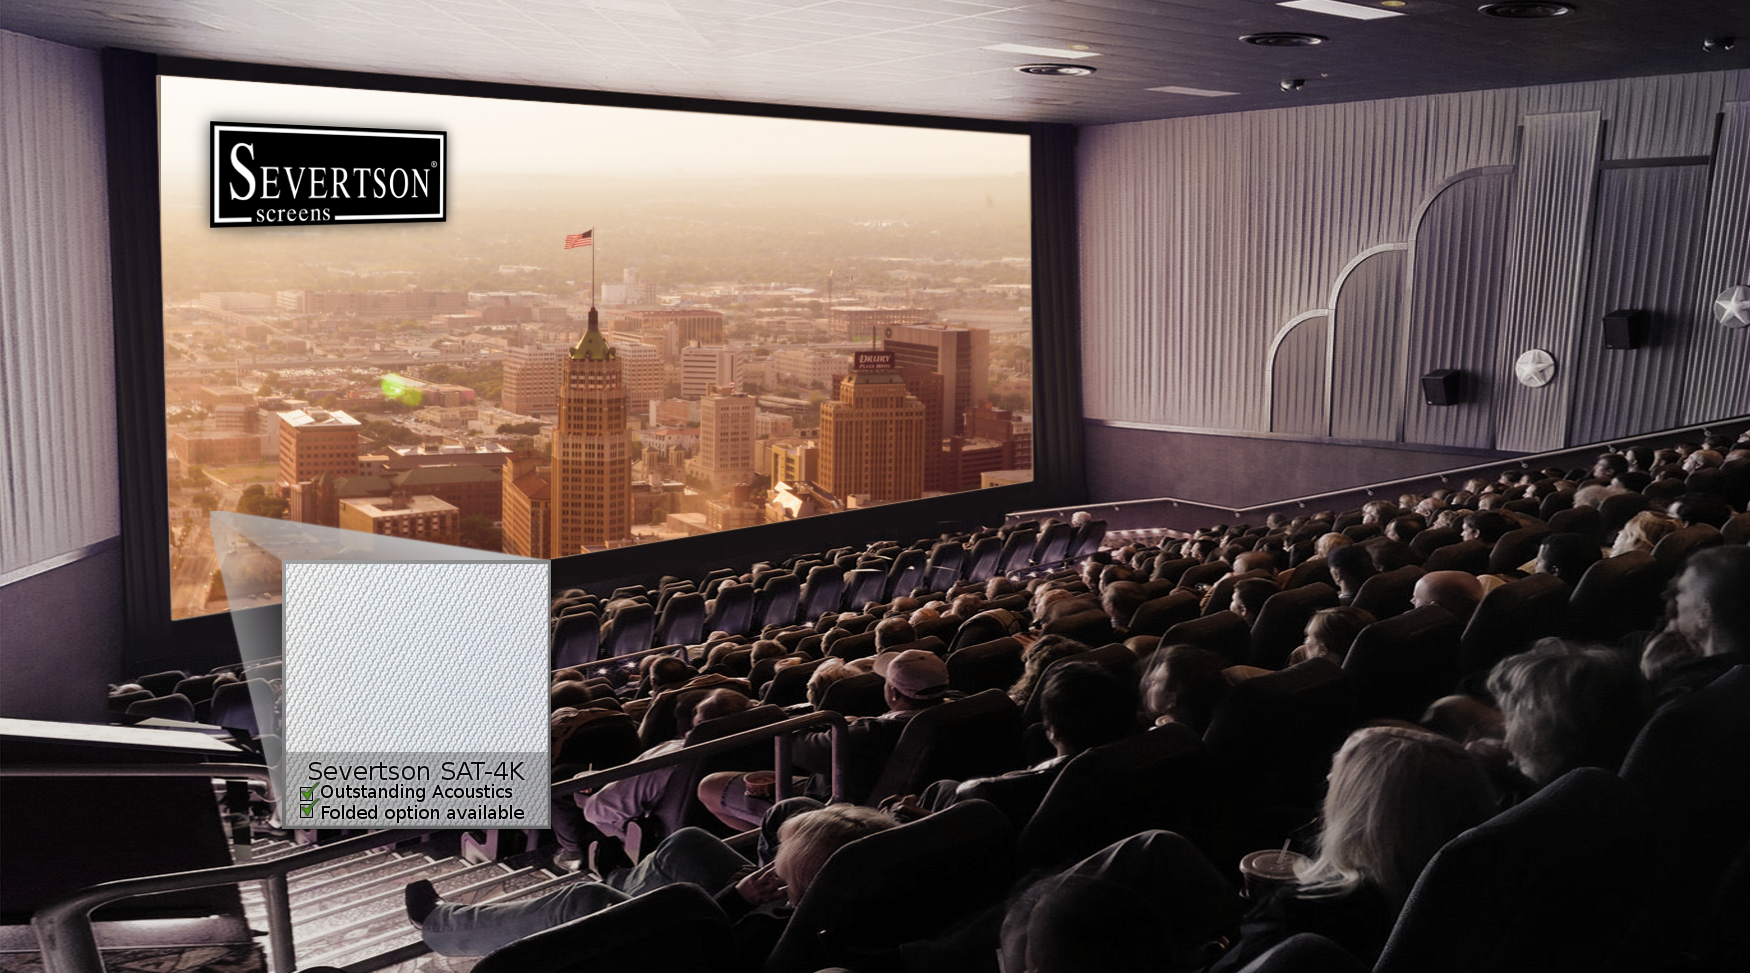 Severtson Screens' SAT-4K for cinema provides top-of-the-line acoustics and stunning, bright visuals.